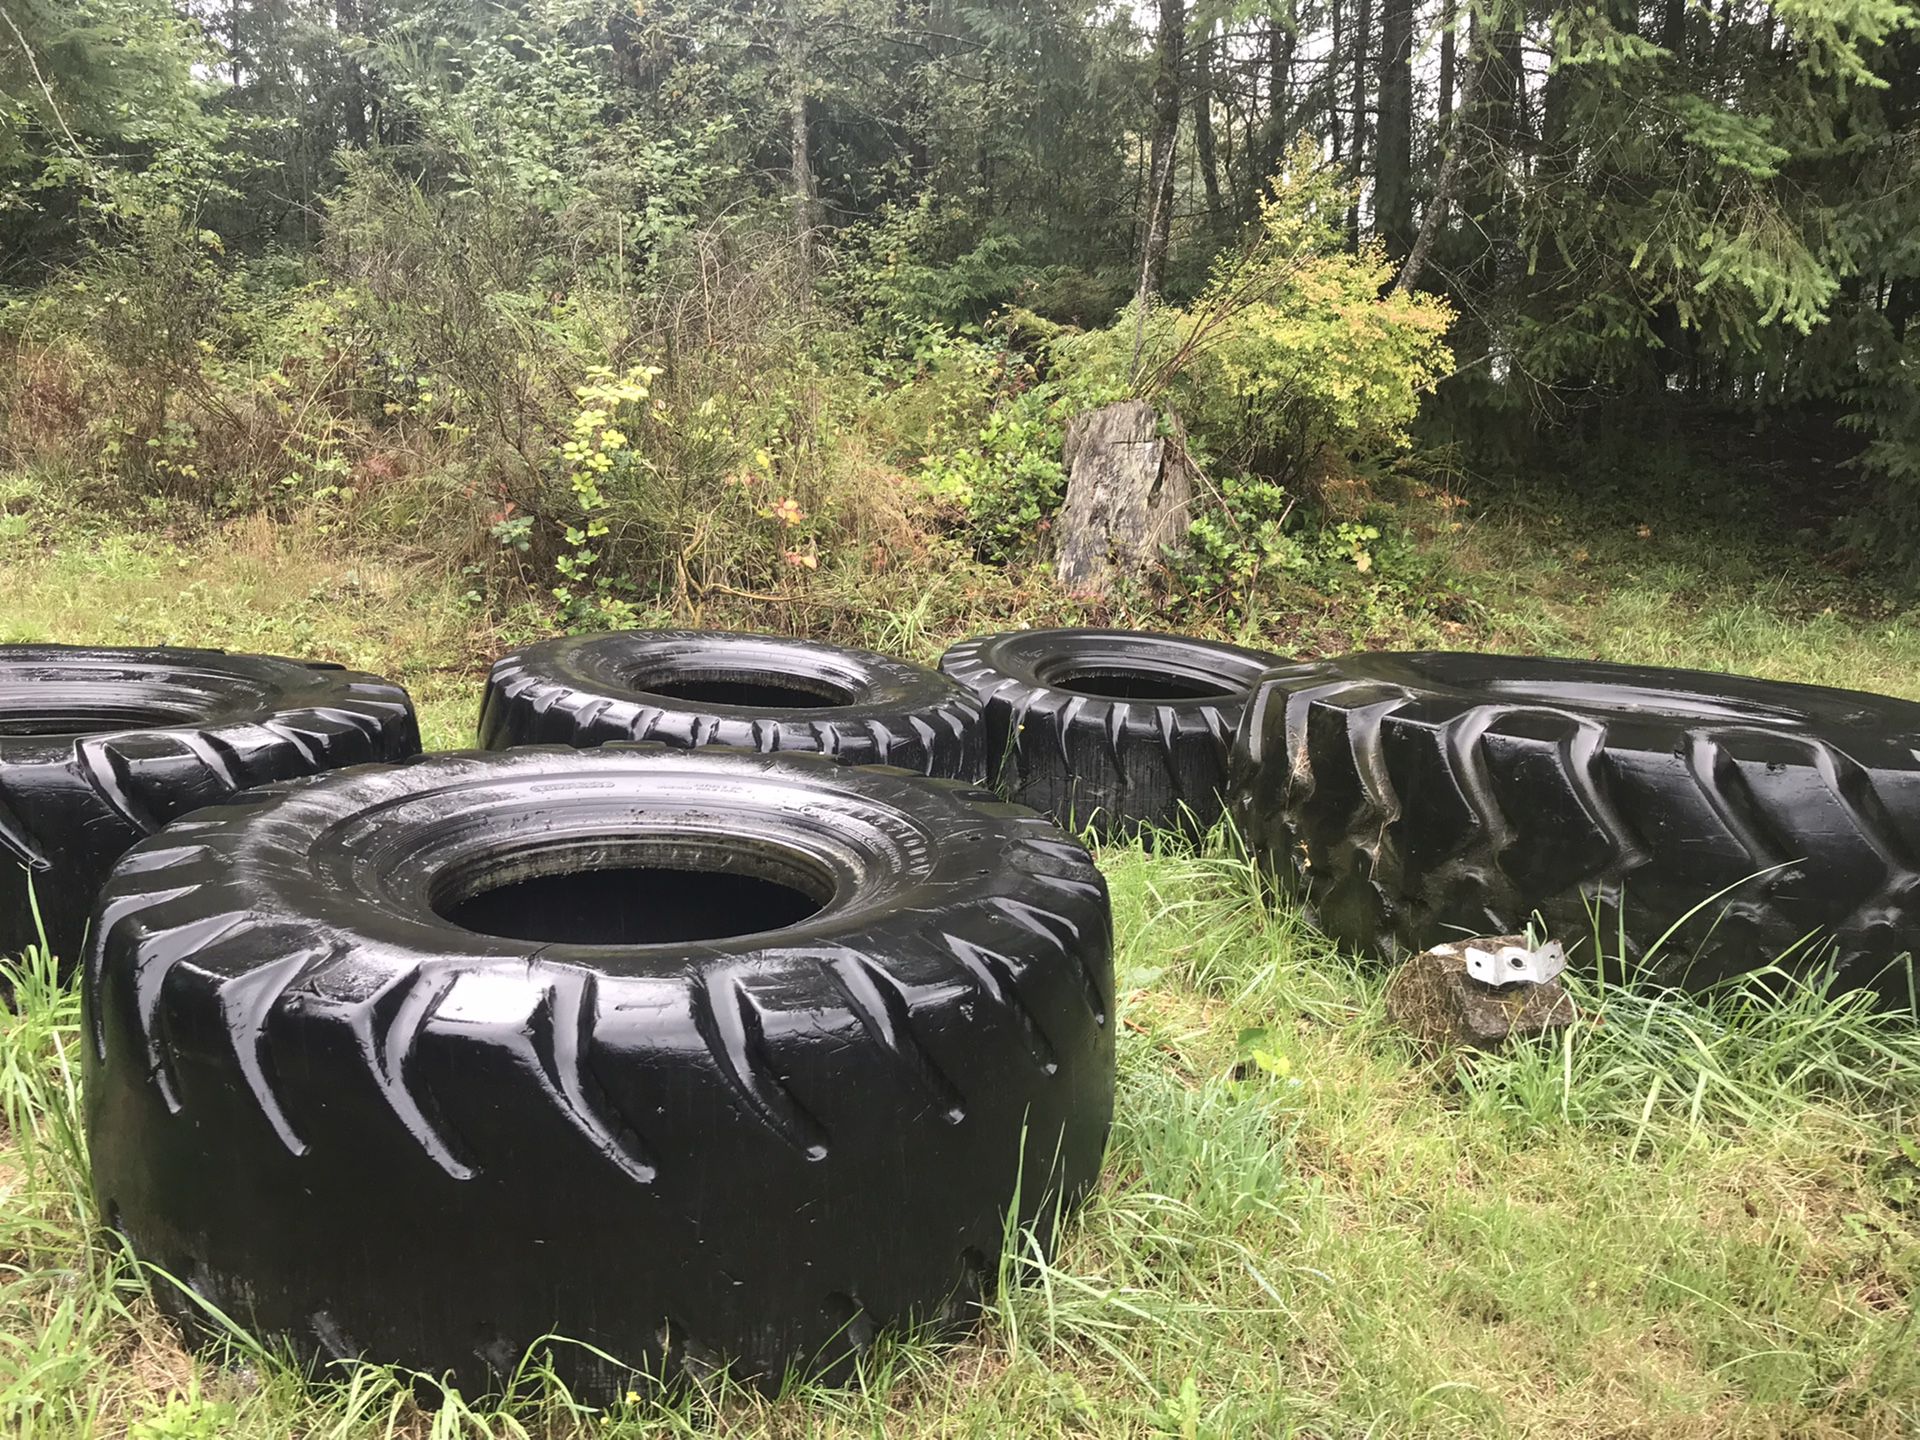 5 LARGE tractor tires